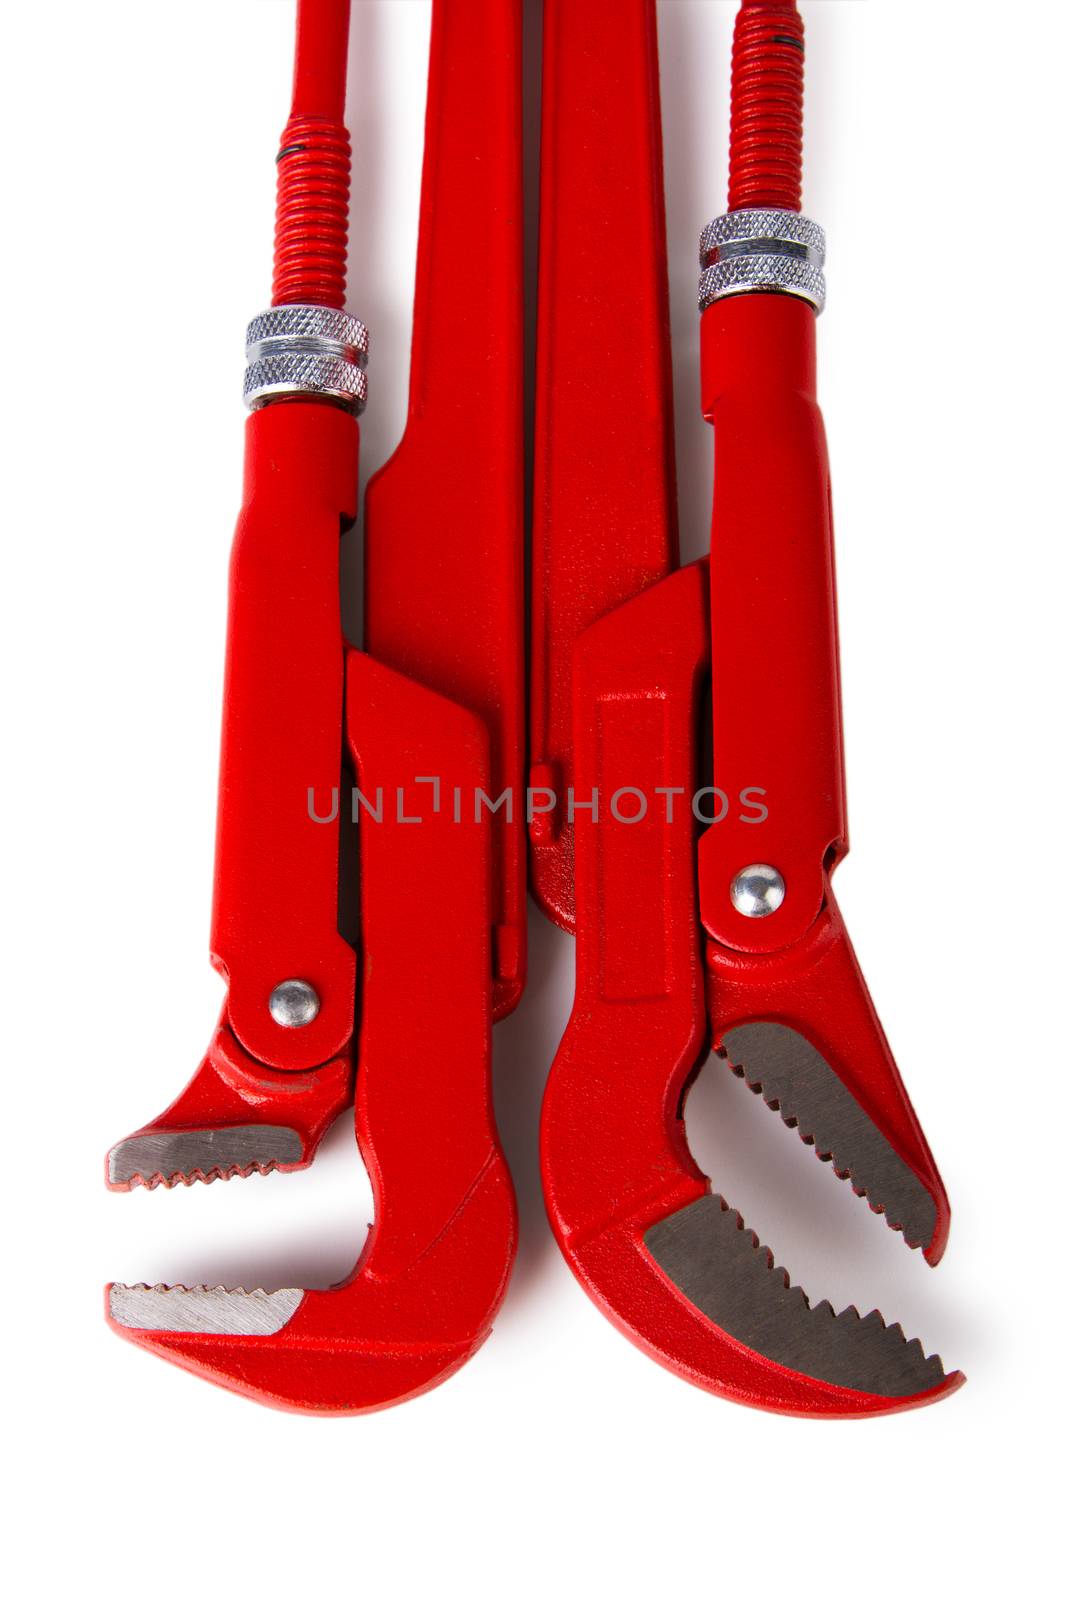 Adjustable pipe wrench, isolated on a white background